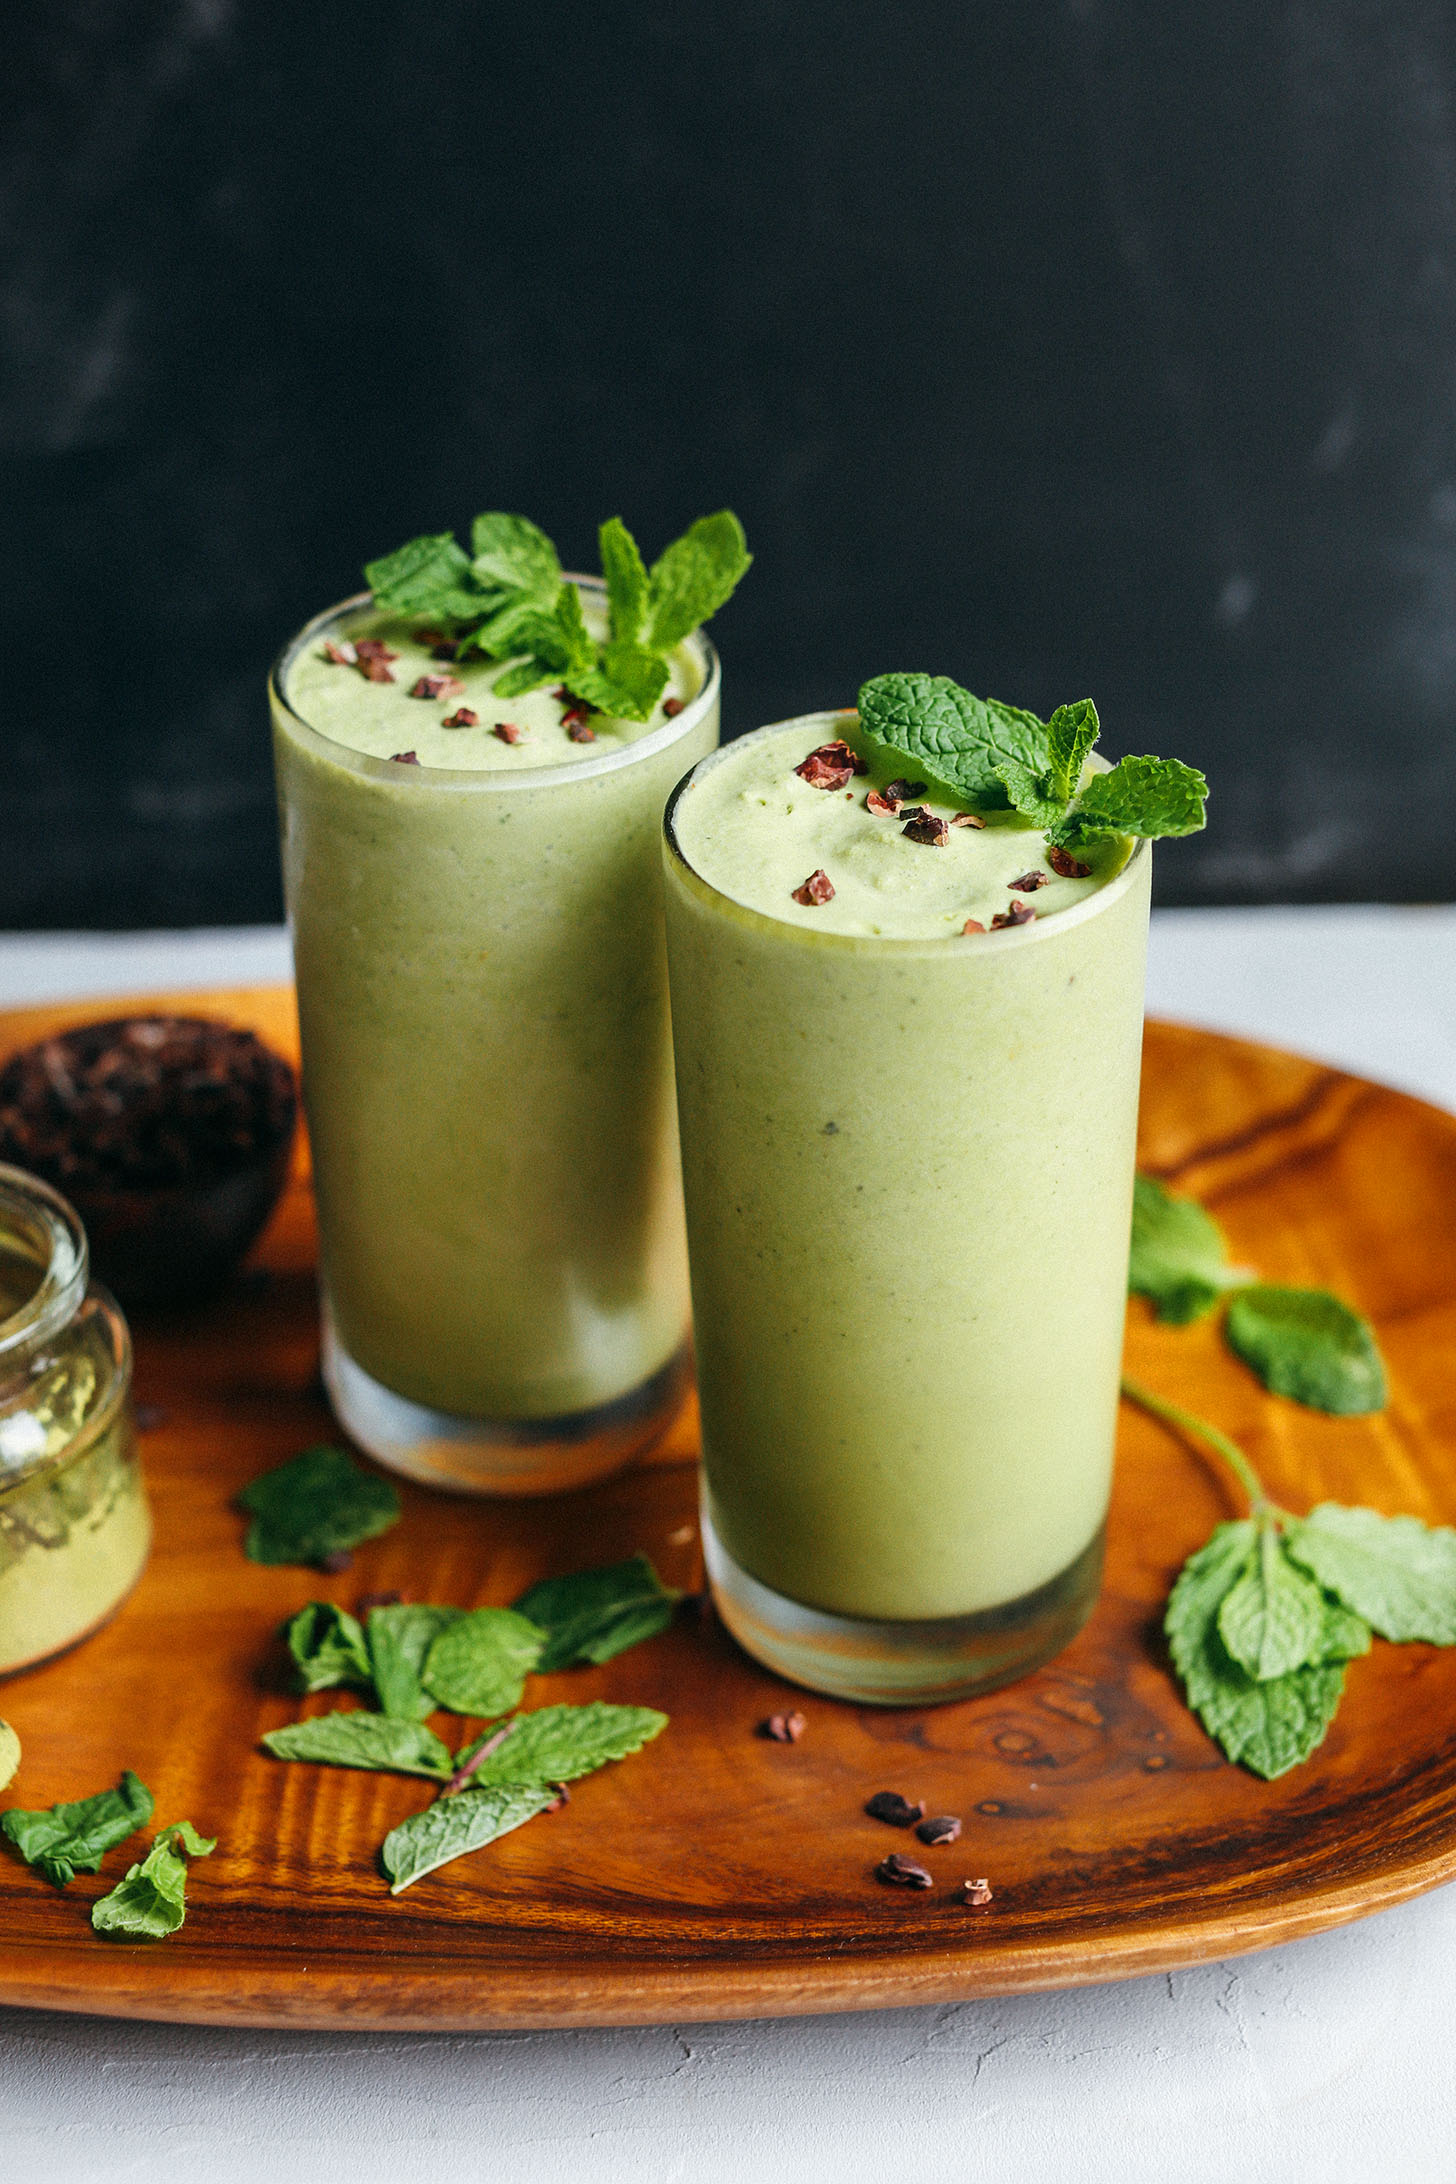 Platter of Vegan Mint Matcha Shakes surrounded by fresh mint leaves